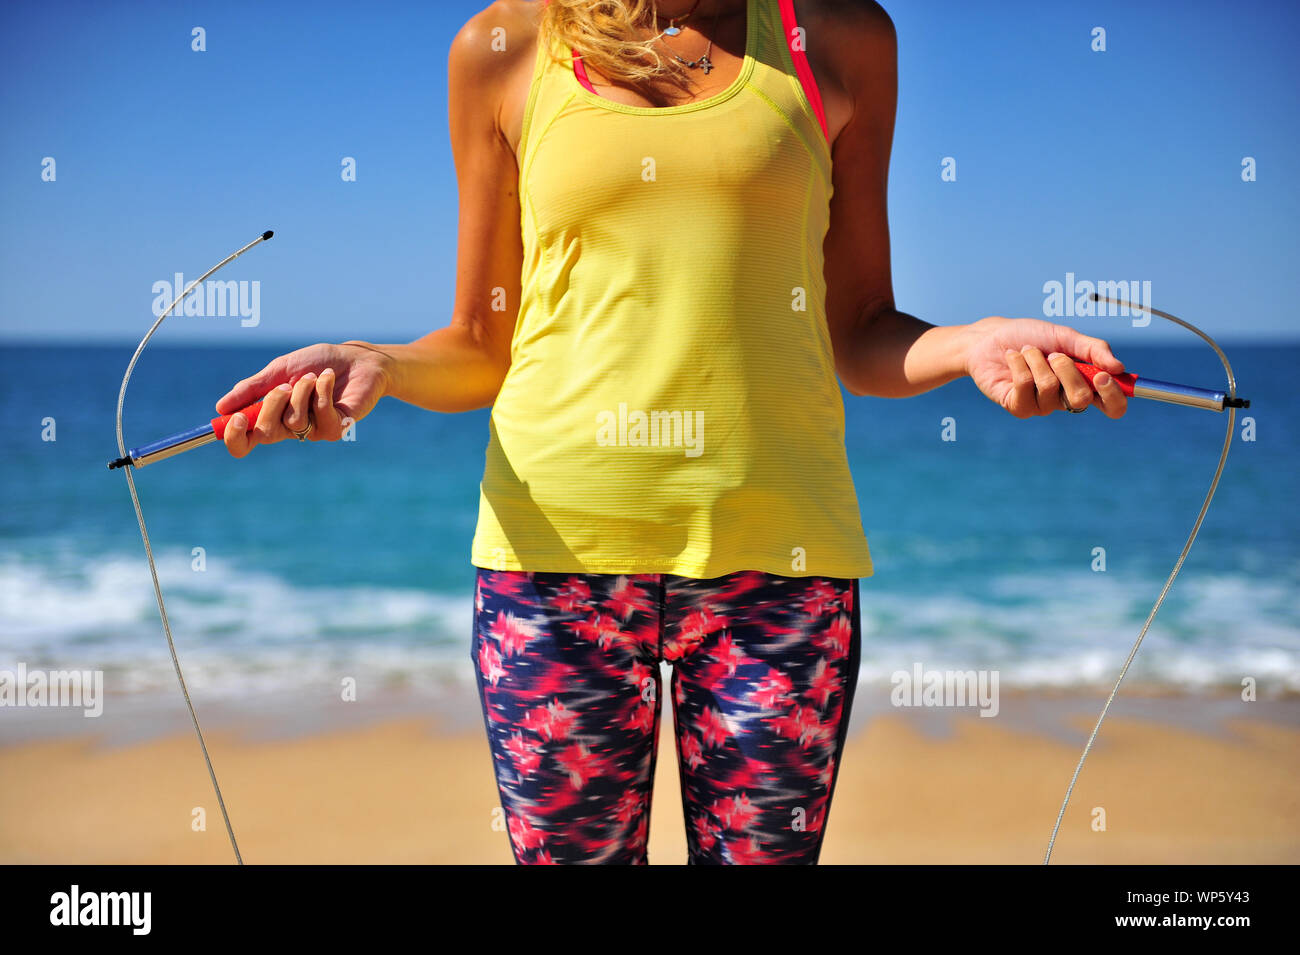 Athletic girl reasy for jumping on the sand beach Stock Photo